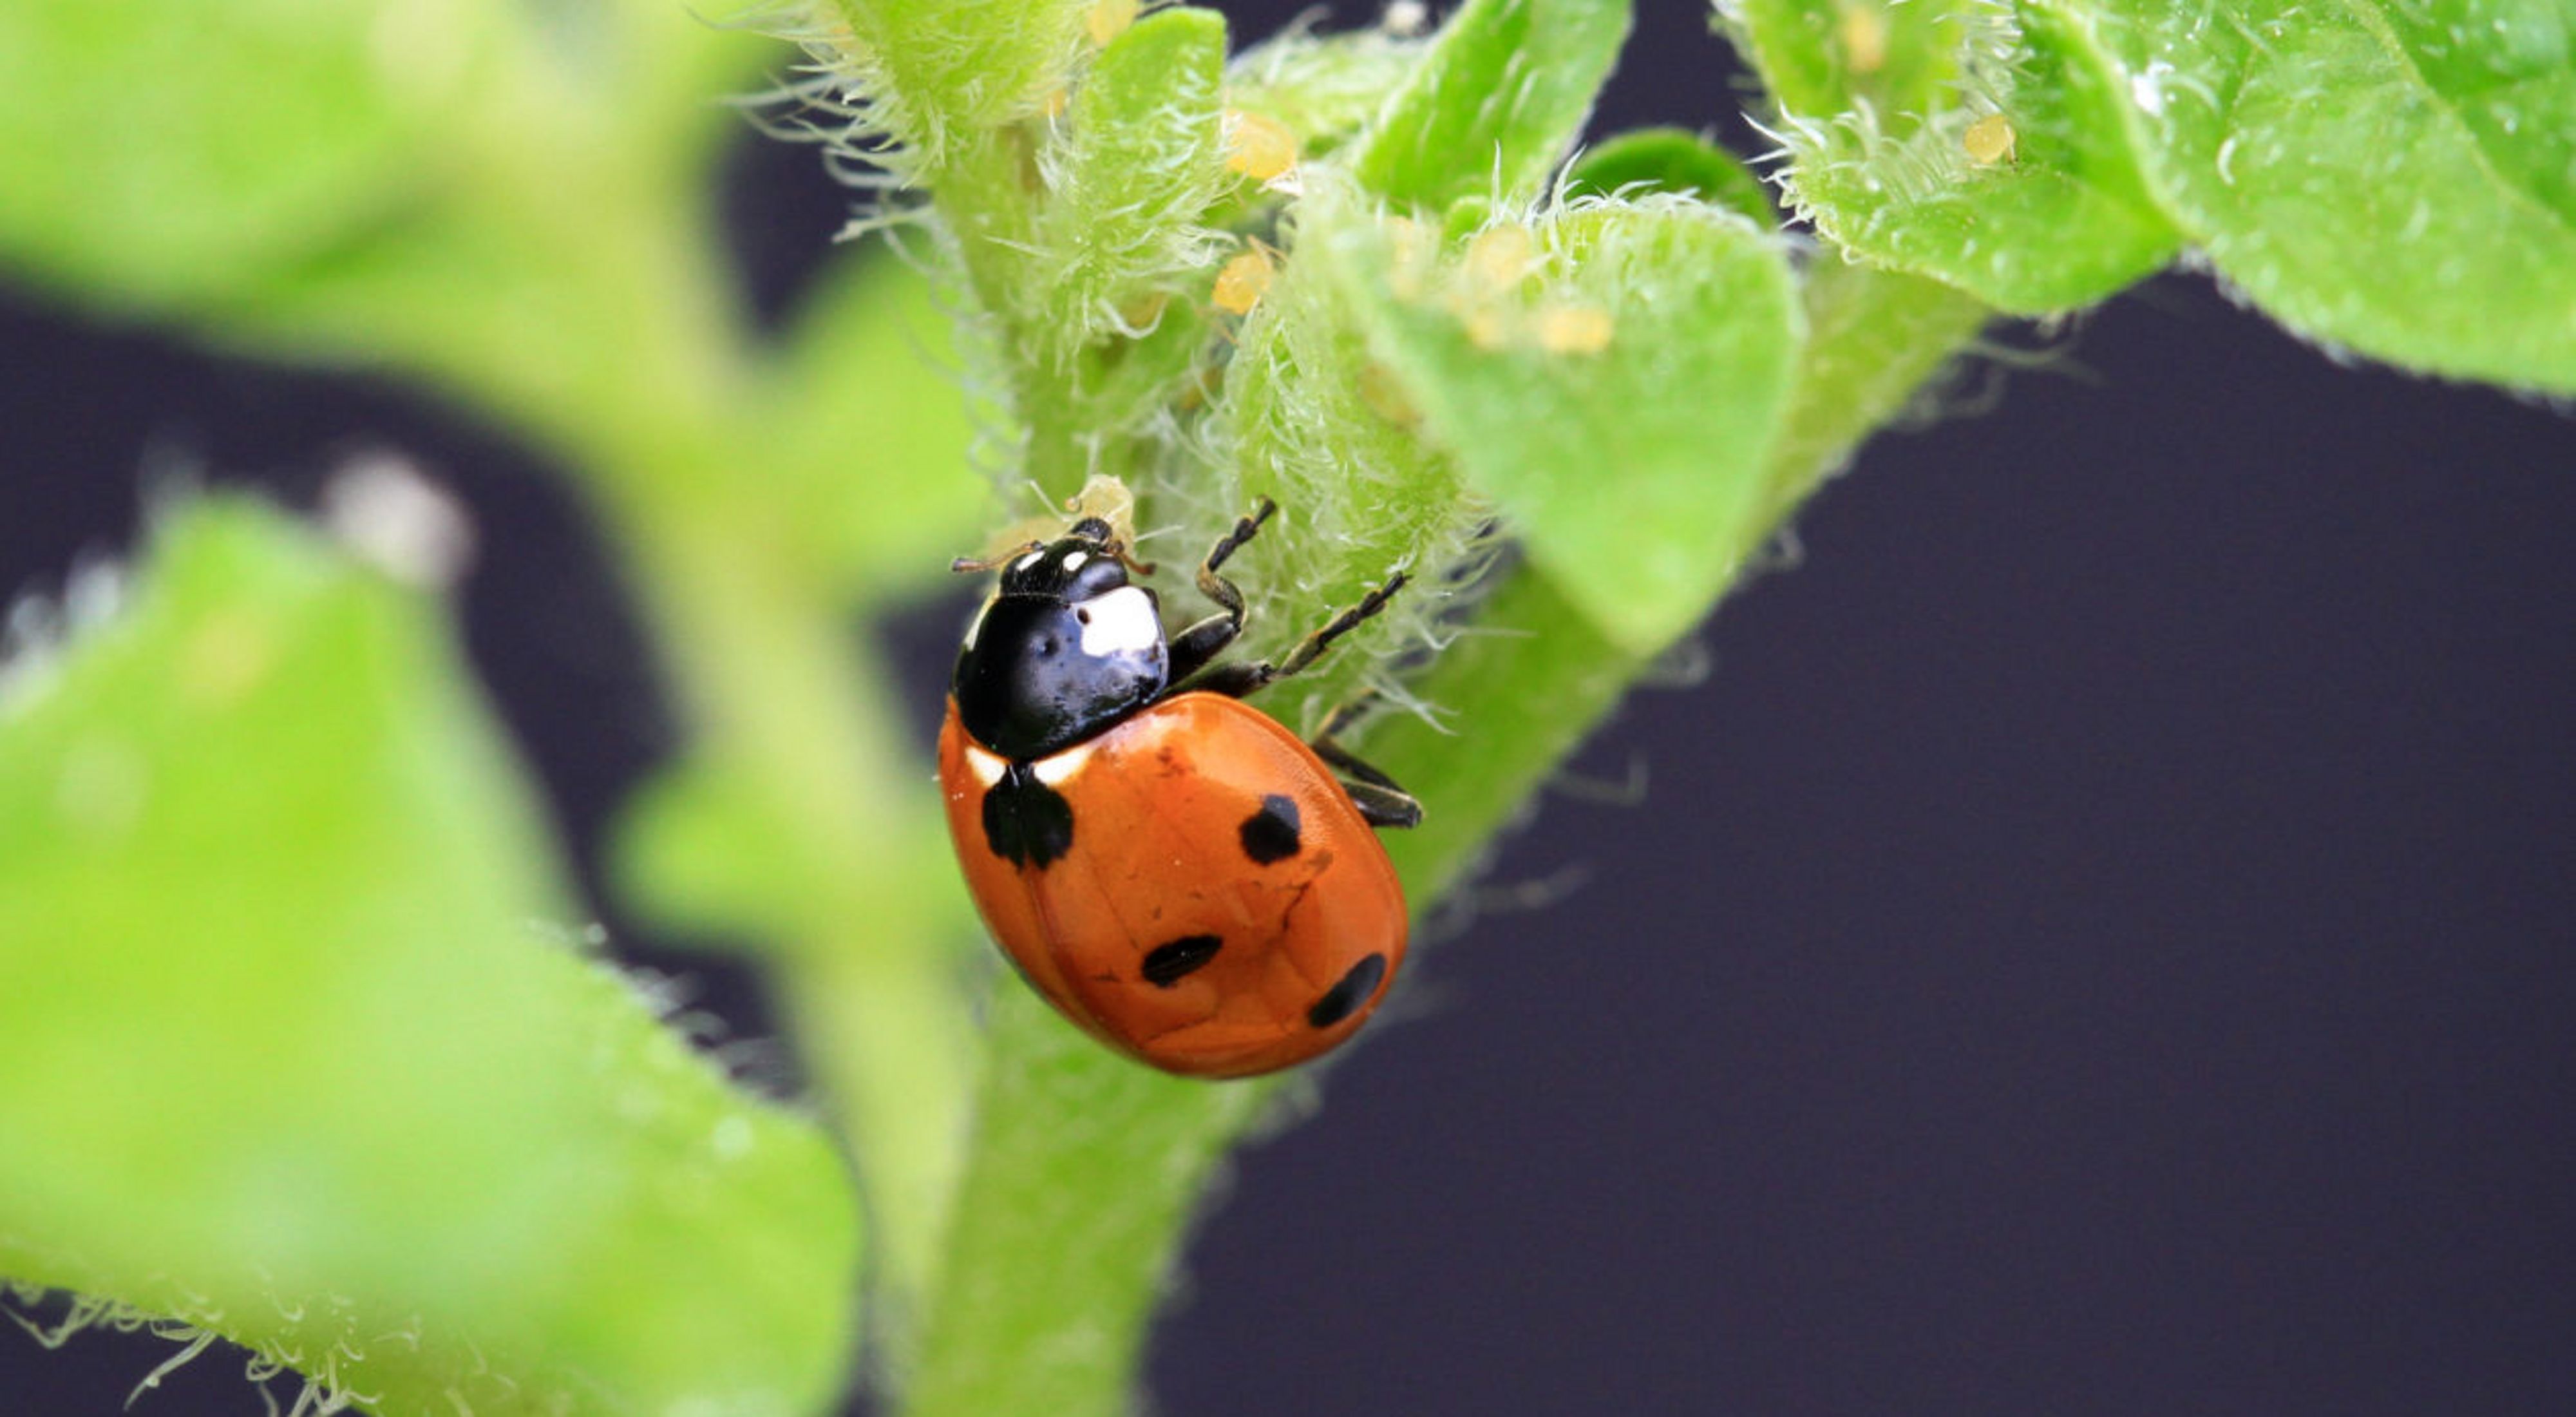 A ladybird predating on aphids on a potato plant.